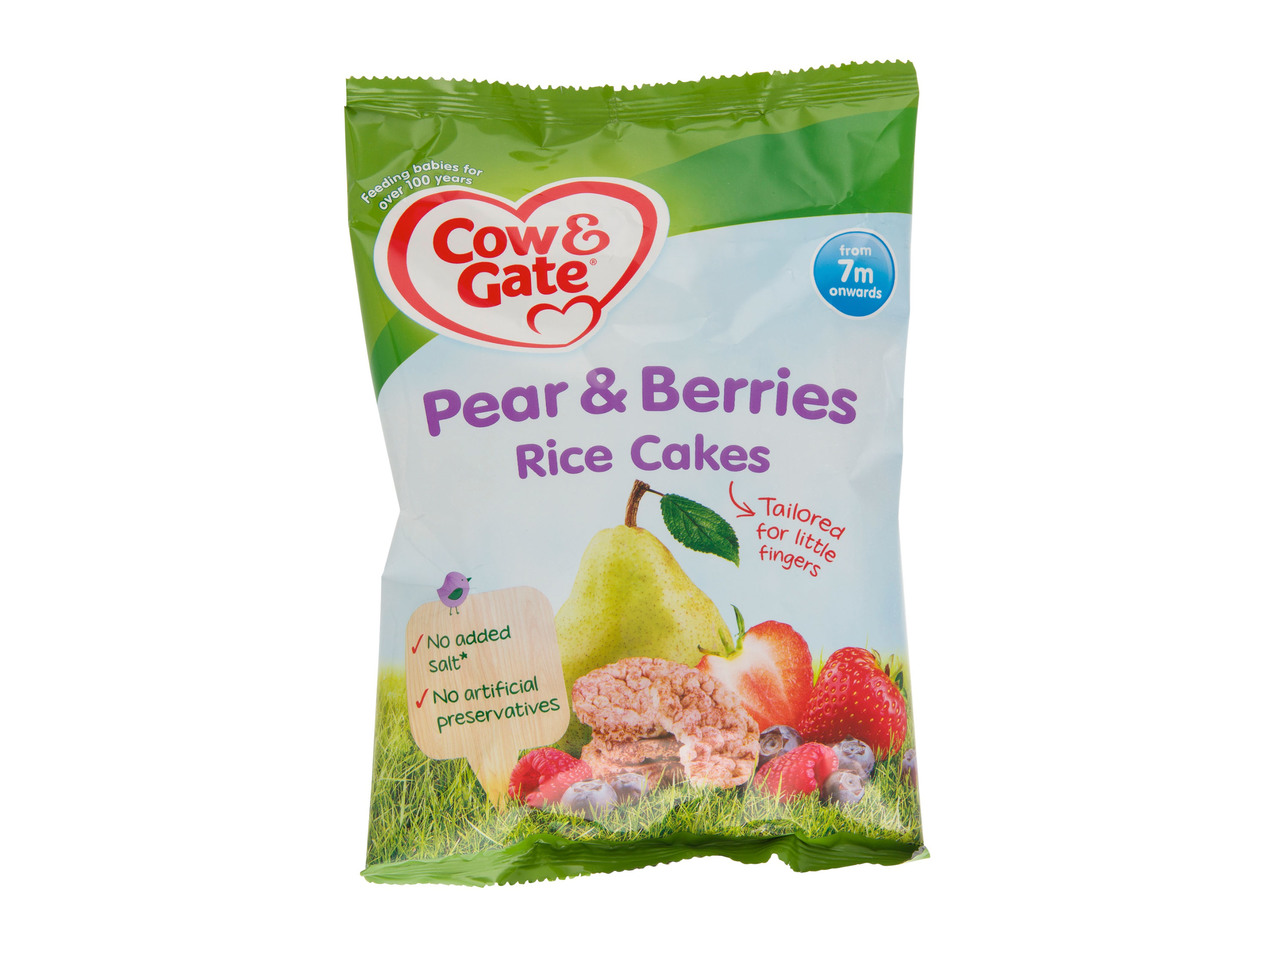 Cow & Gate Rice Cakes Pear & Berries